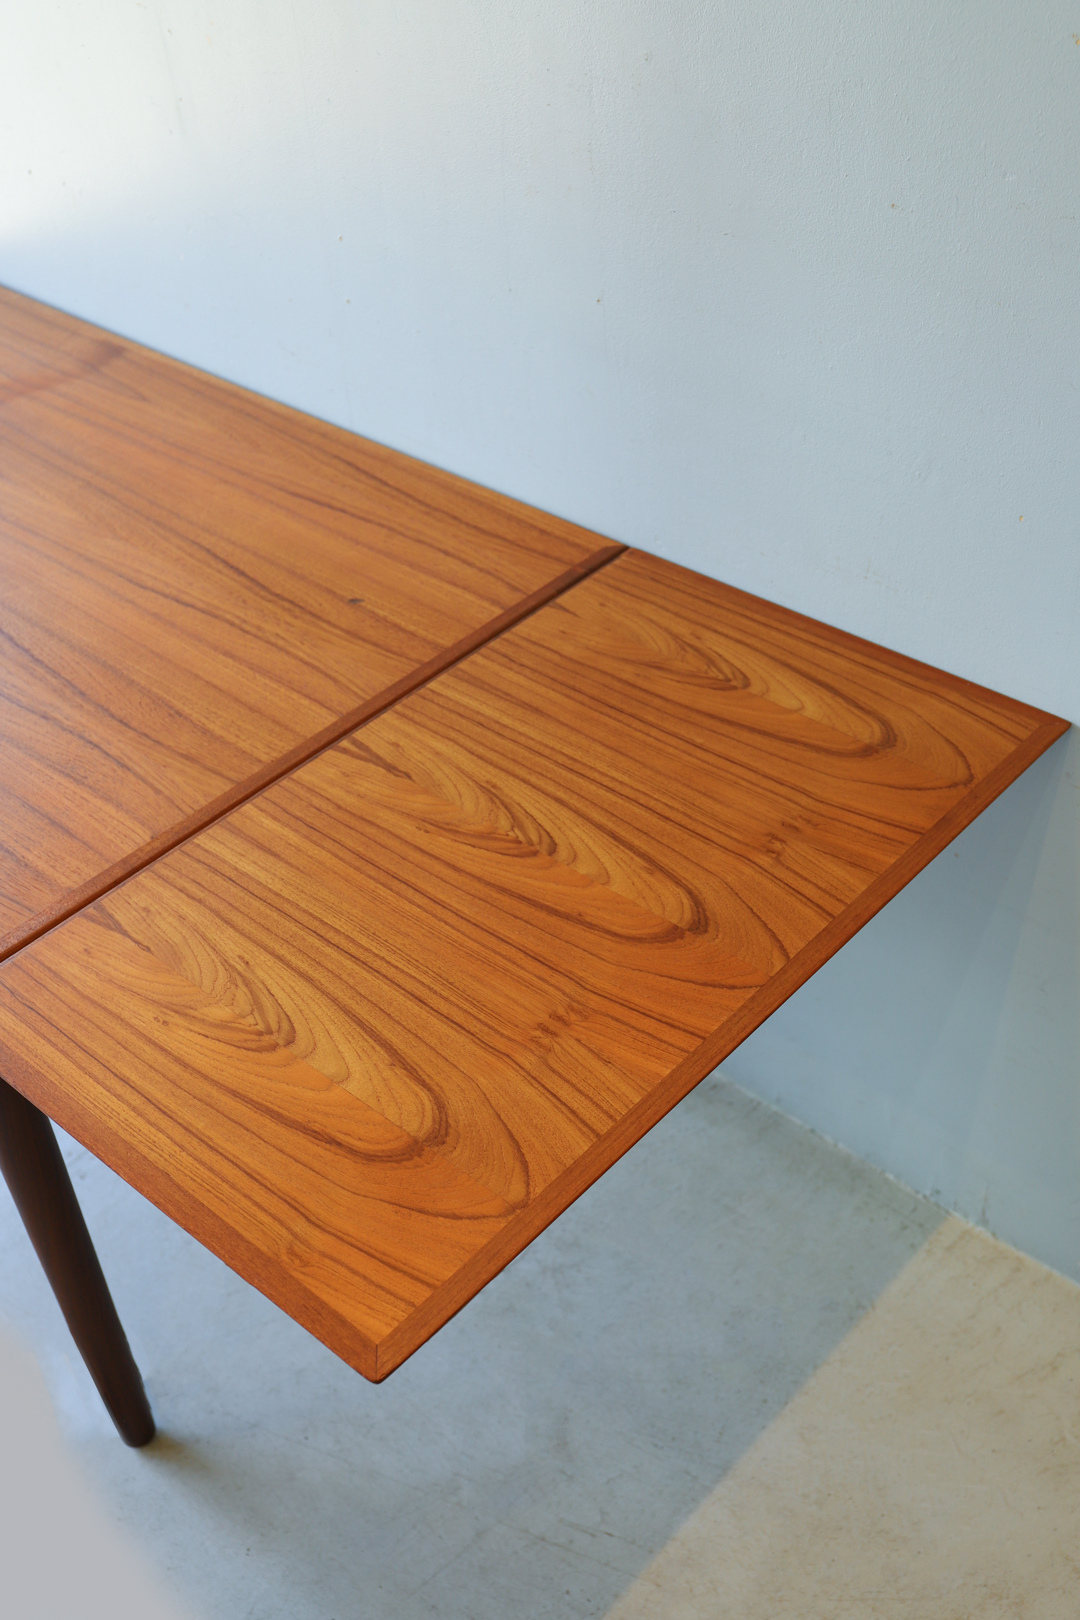 Danish Vintage Draw Leaf Extension Dining Table/デンマークヴィンテージ エクステンション ダイニングテーブル ドローリーフ チーク材 北欧家具